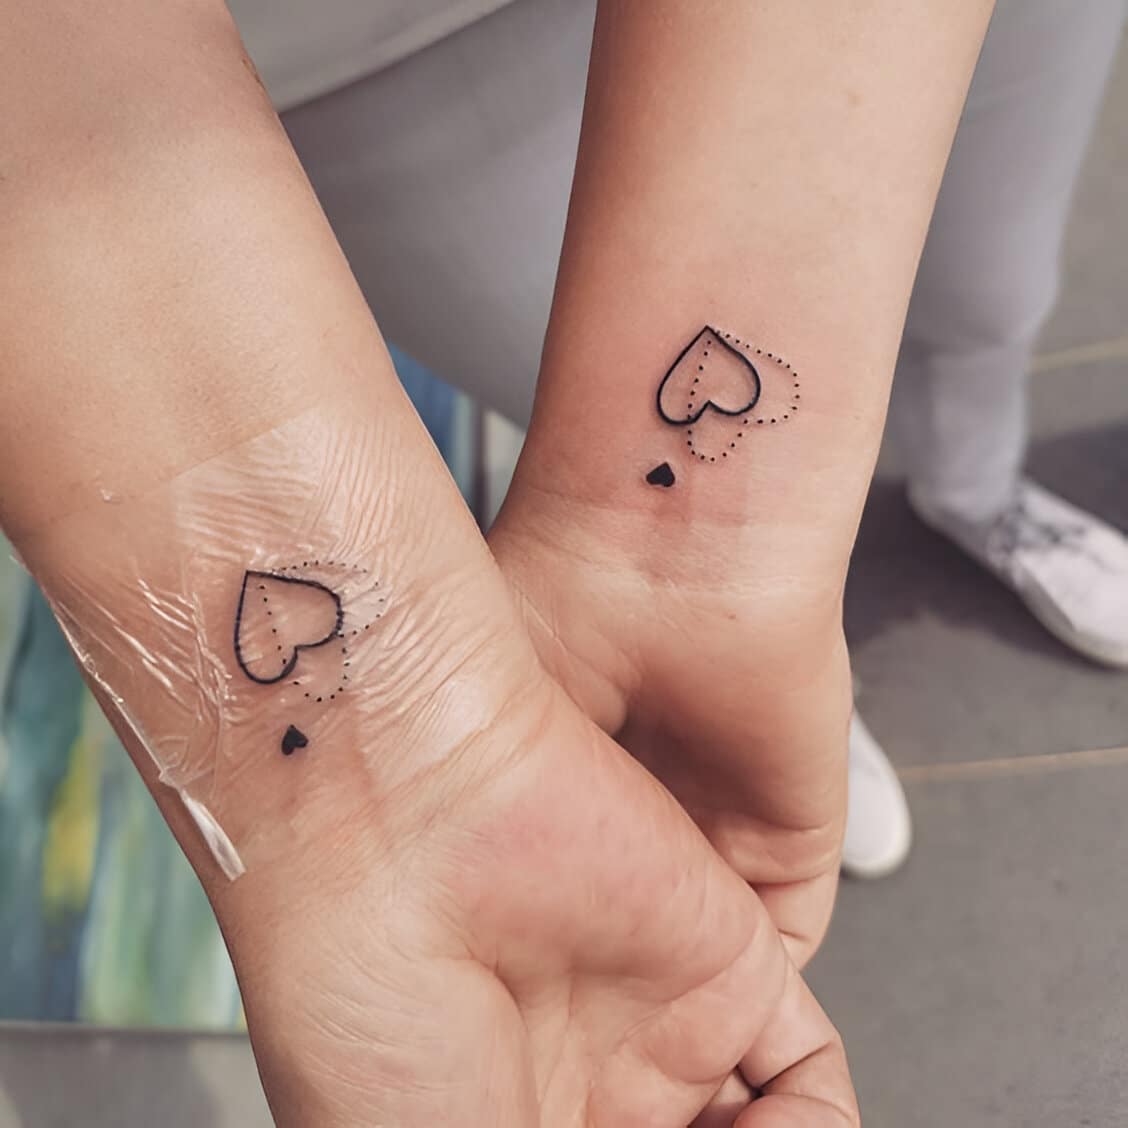 30 Elegant Matching Heart Tattoos To Get With Your Partner ASAP 26